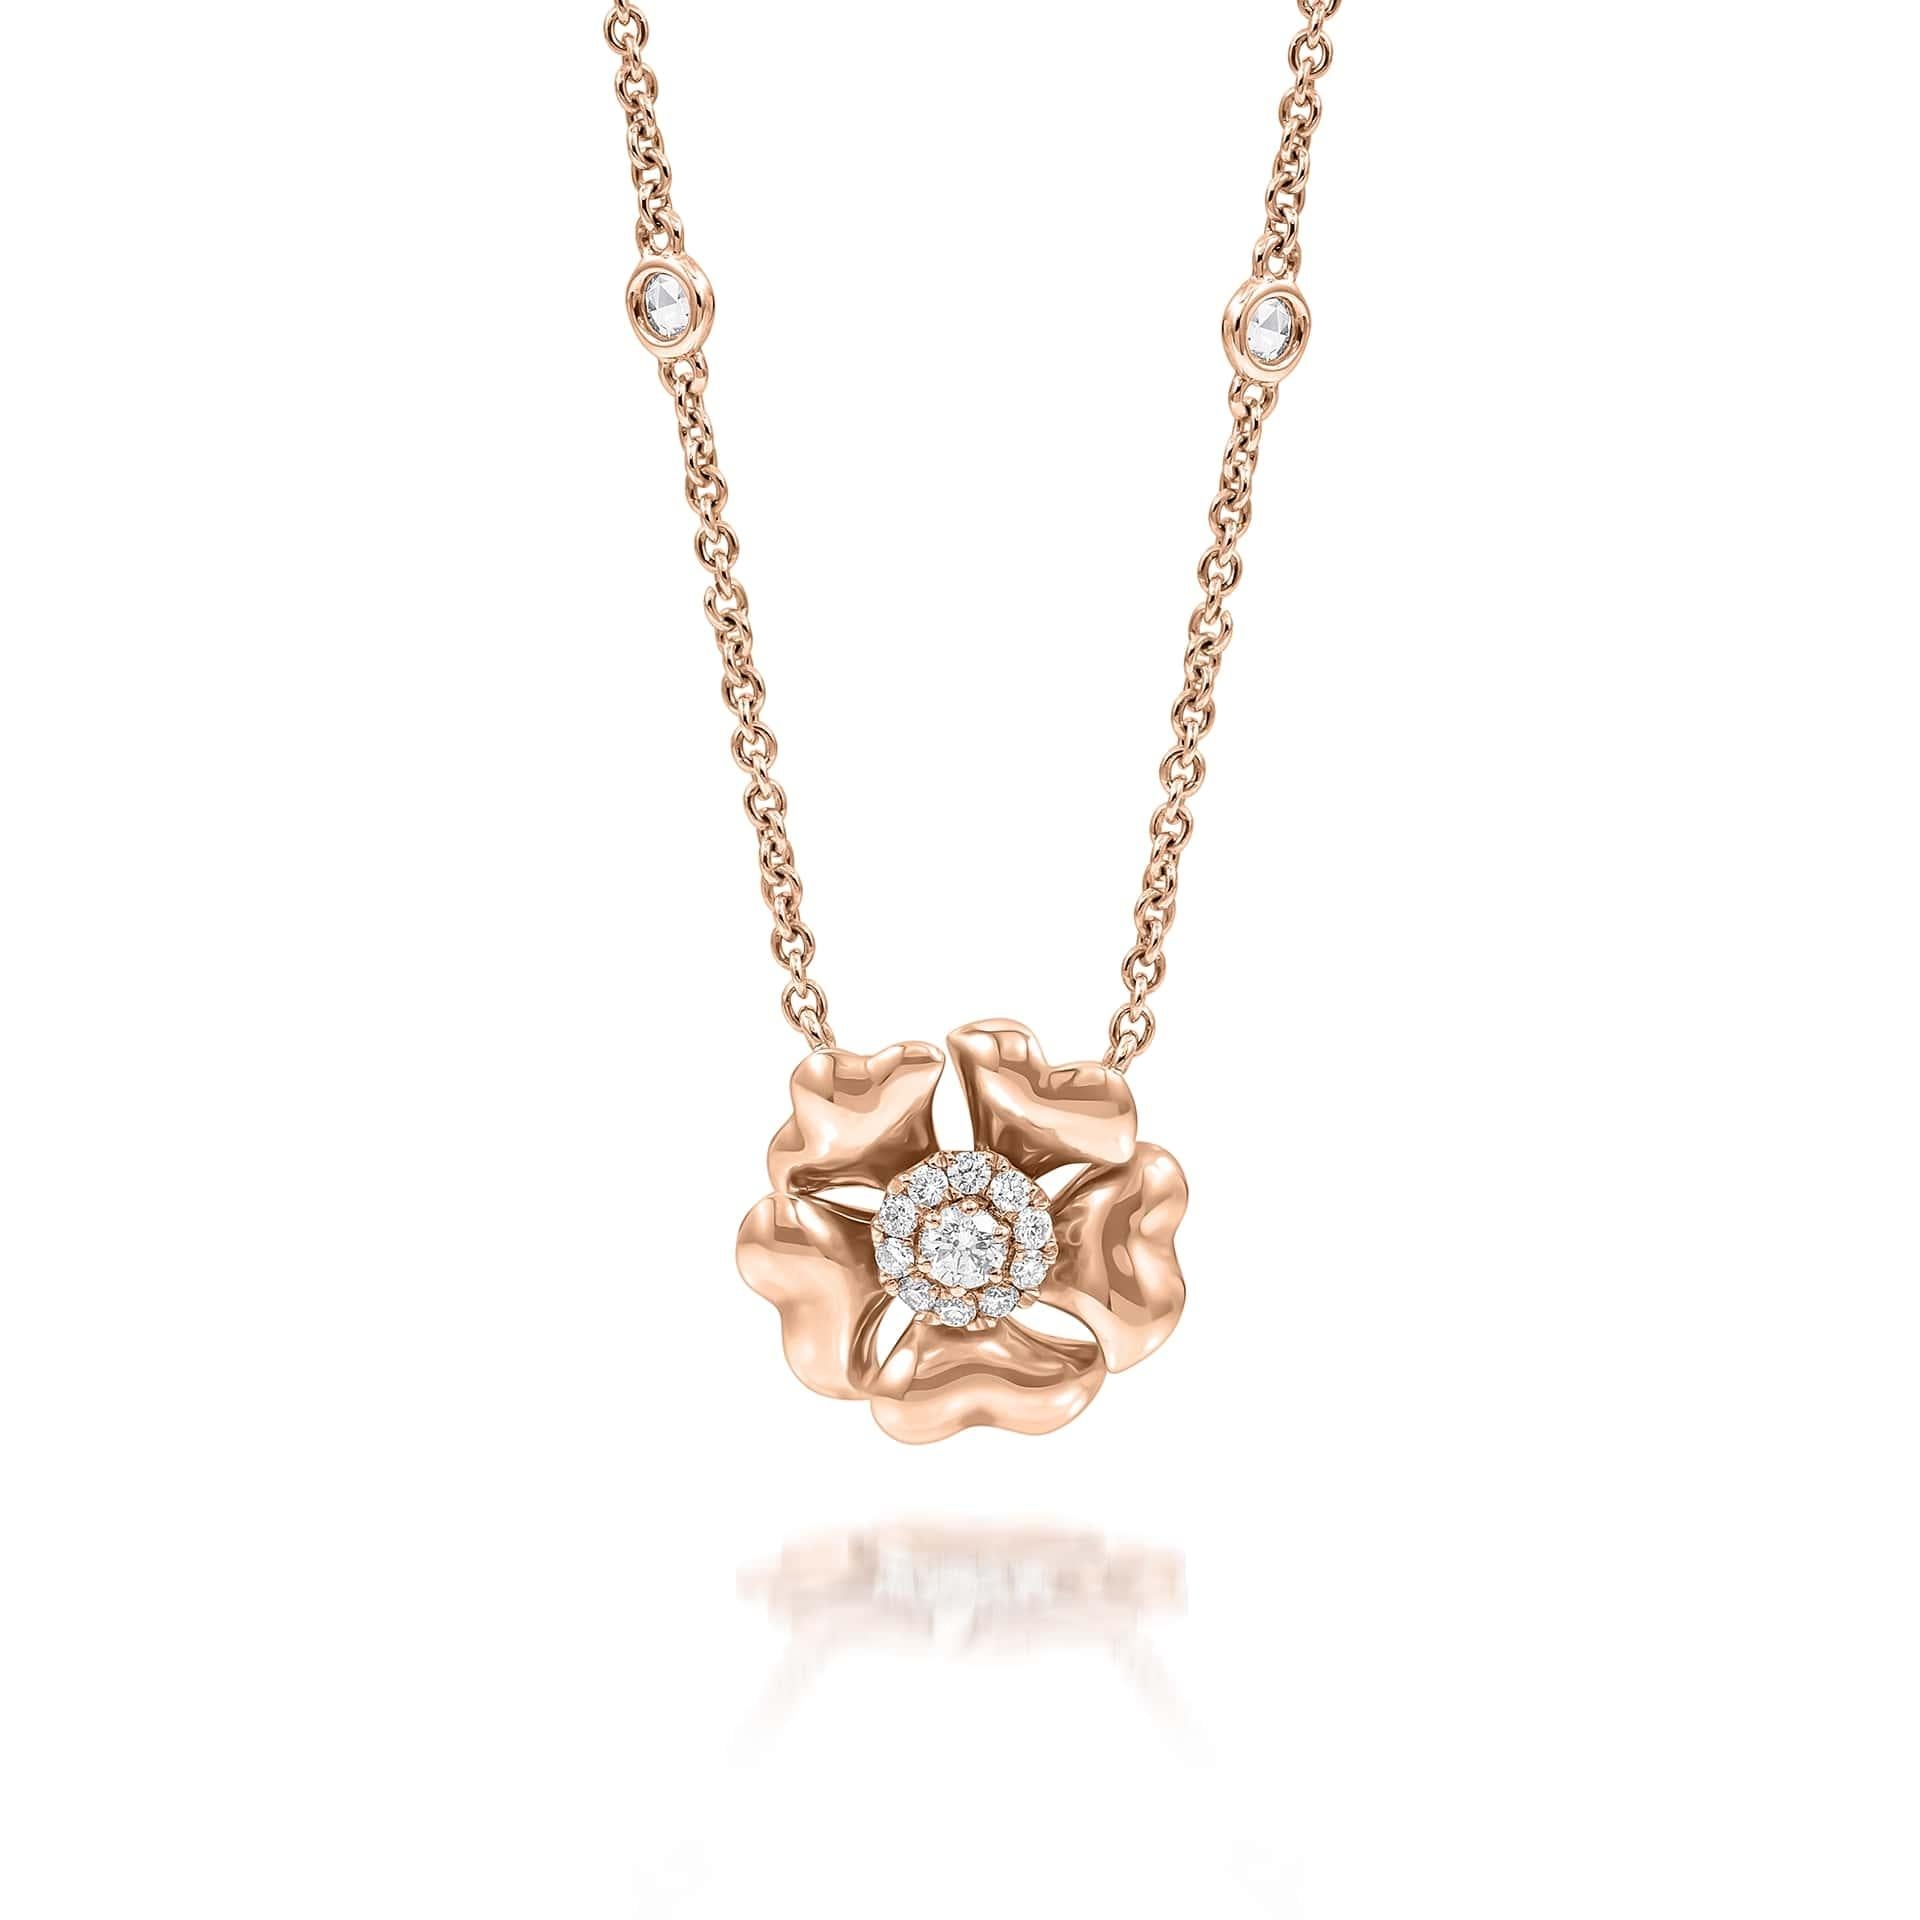 Bloom Gold and Diamond Flower Halo Necklace in 18K Rose Gold

Inspired by the exquisite petals of the alpine cinquefoil flower, the Bloom collection combines the richness of diamonds and precious metals with the light versatility of this delicate,